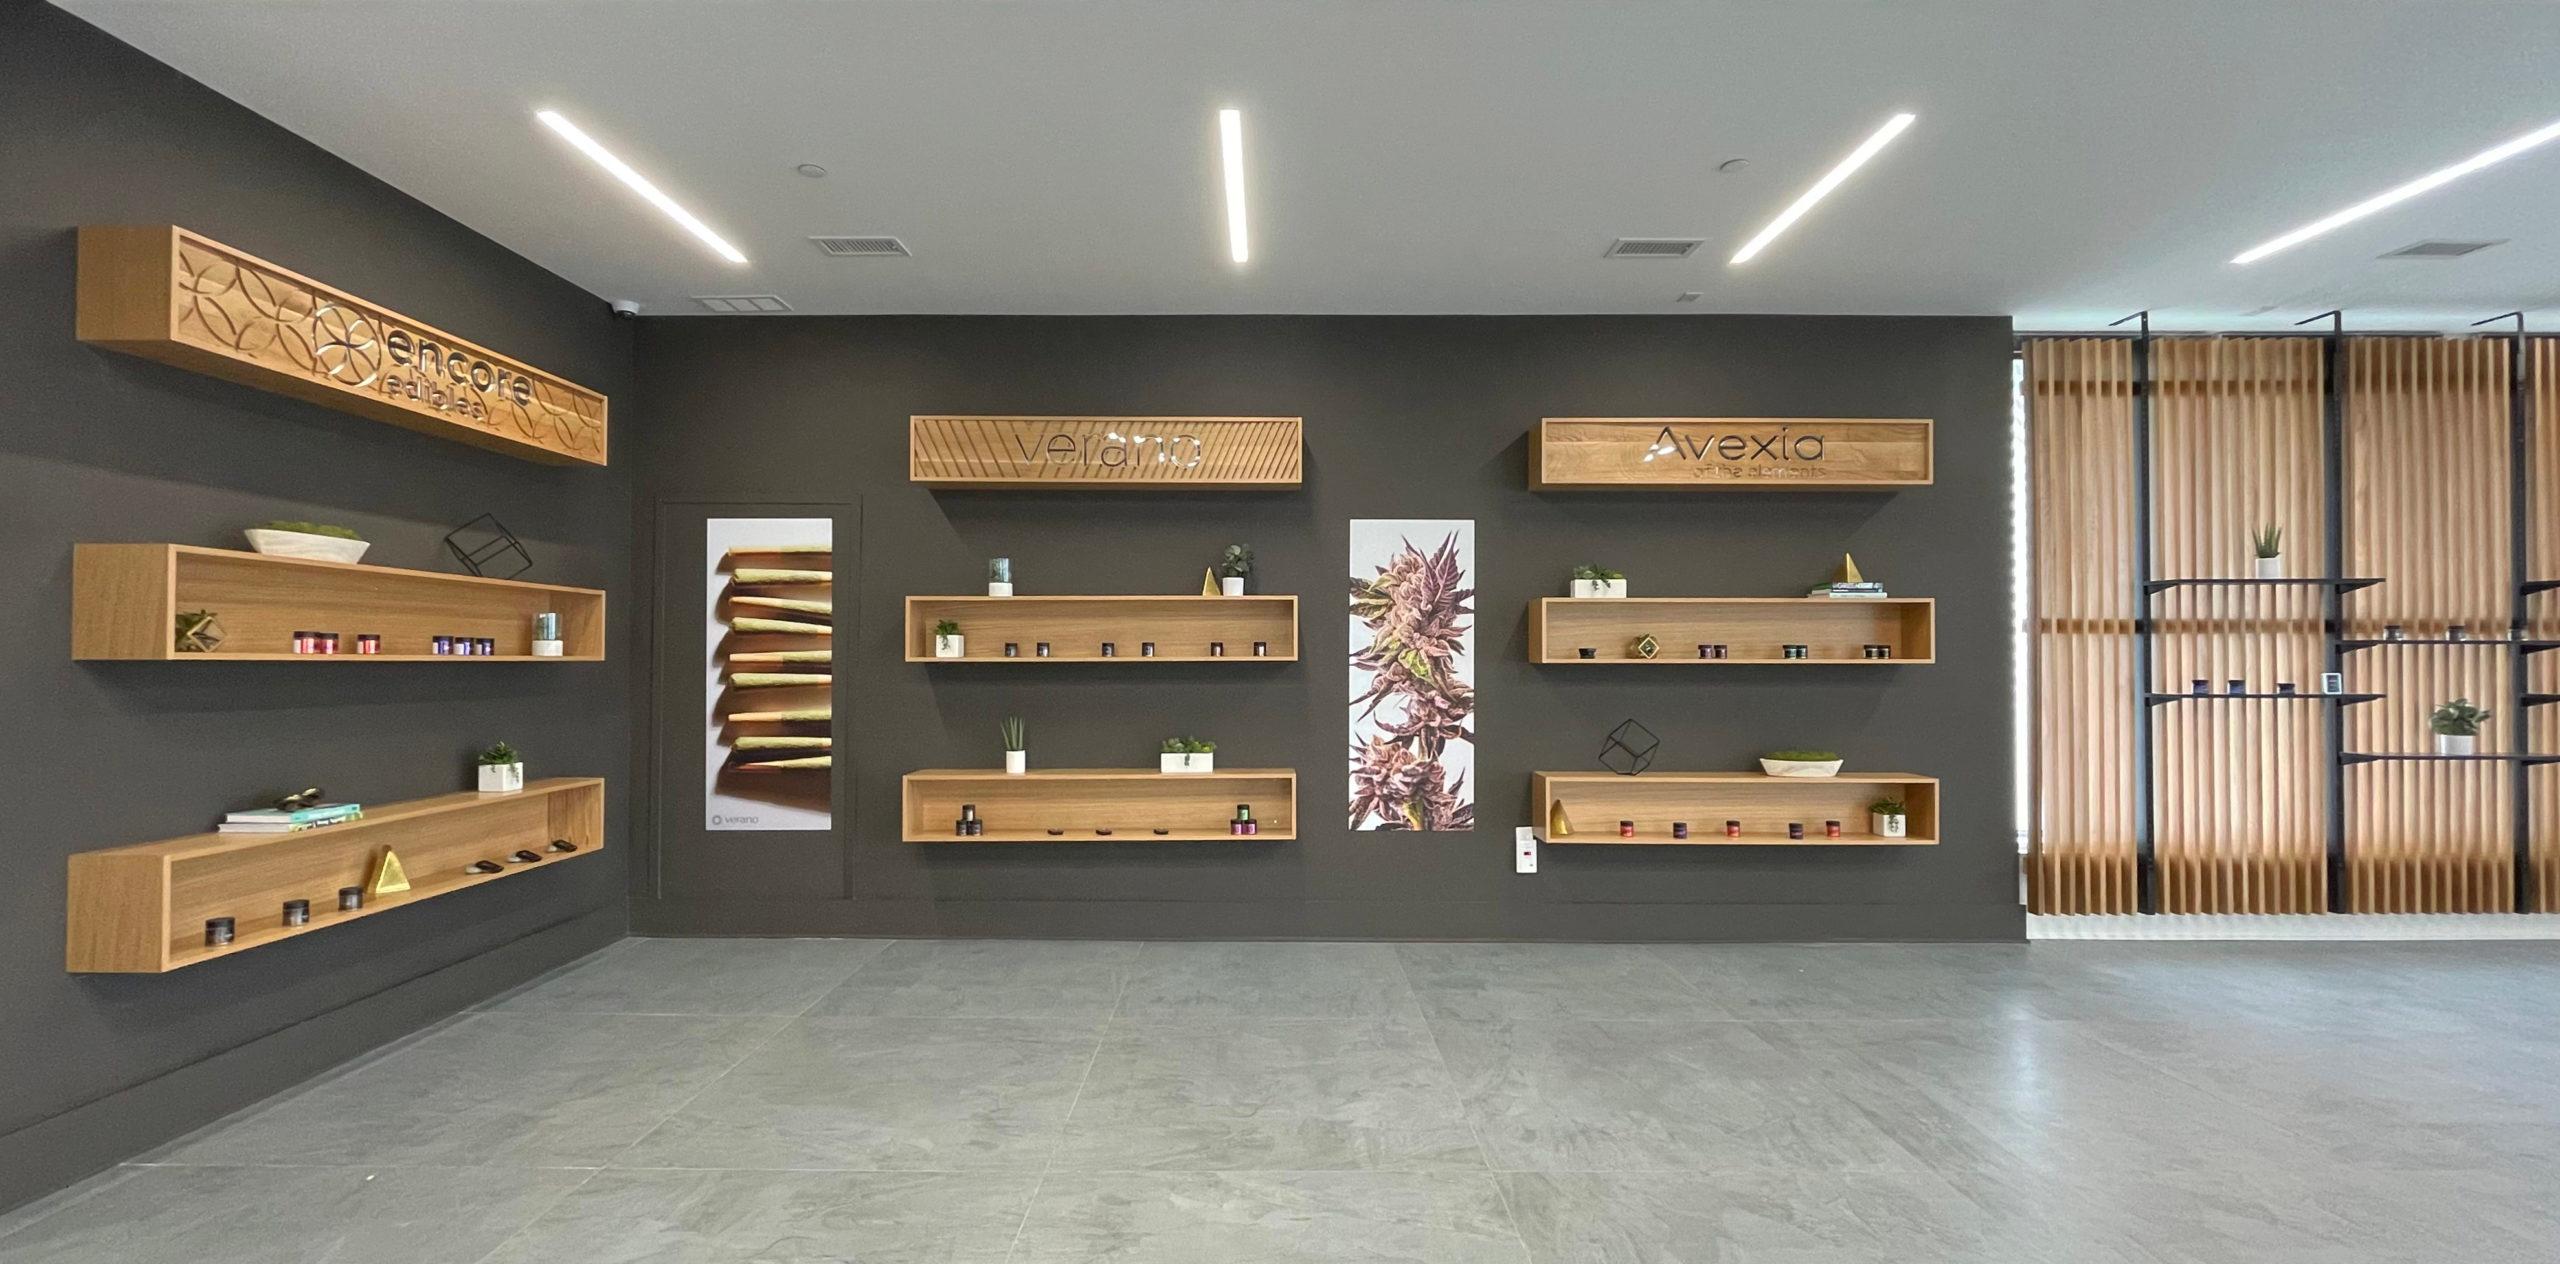 Neptune, New Jersey Medical and Recreational Cannabis Dispensary